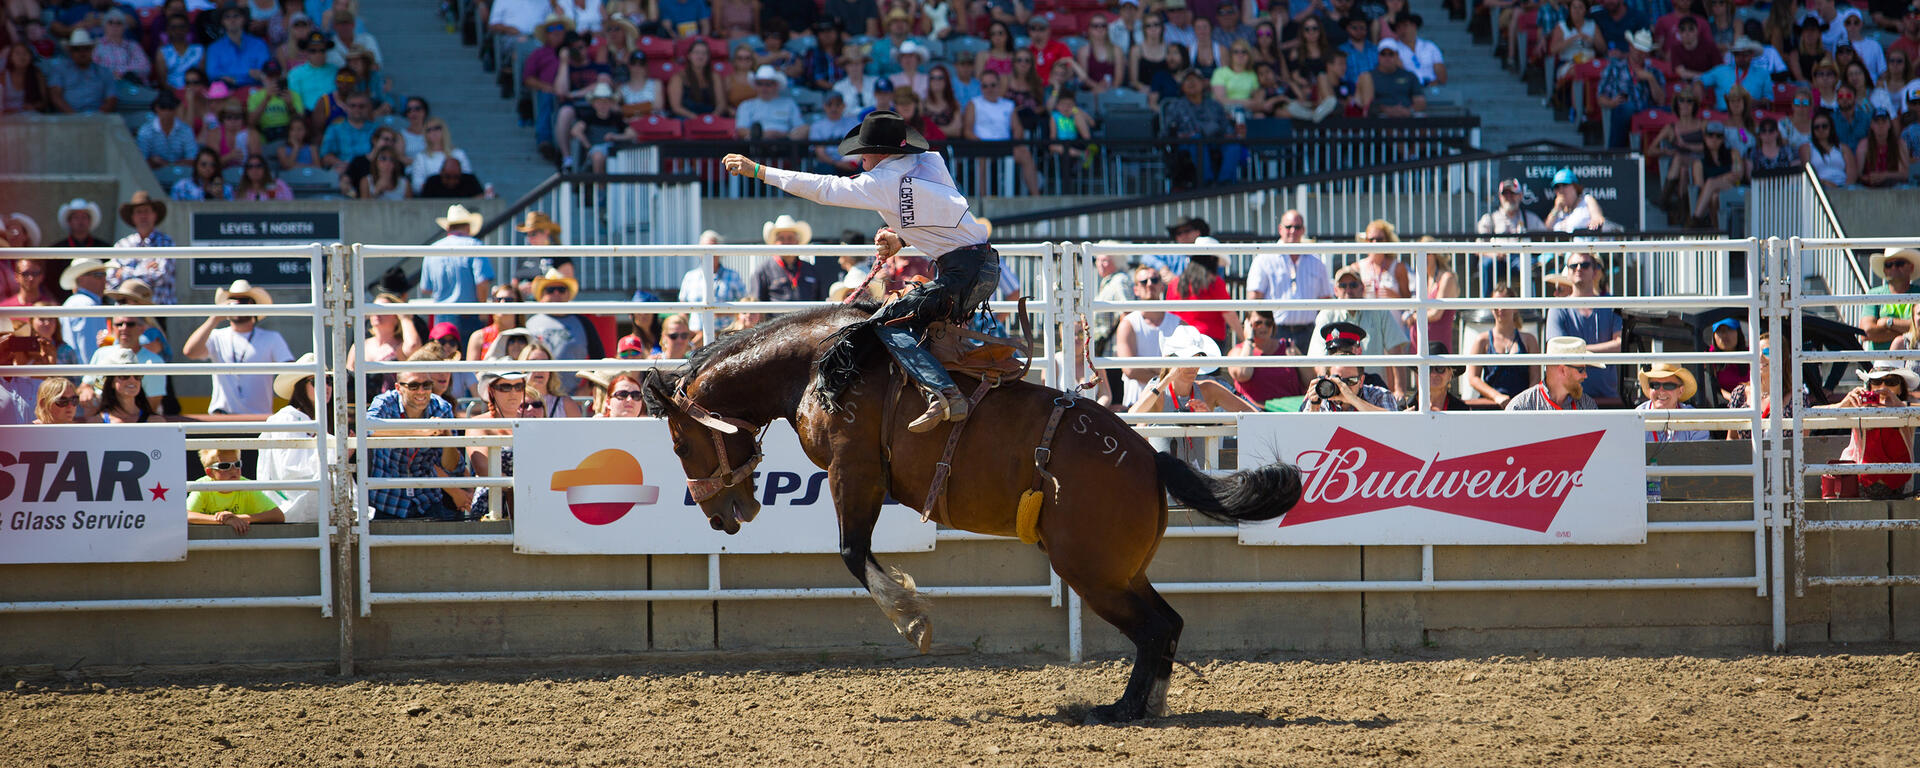 Calgary Stampede rodeo horse and rider